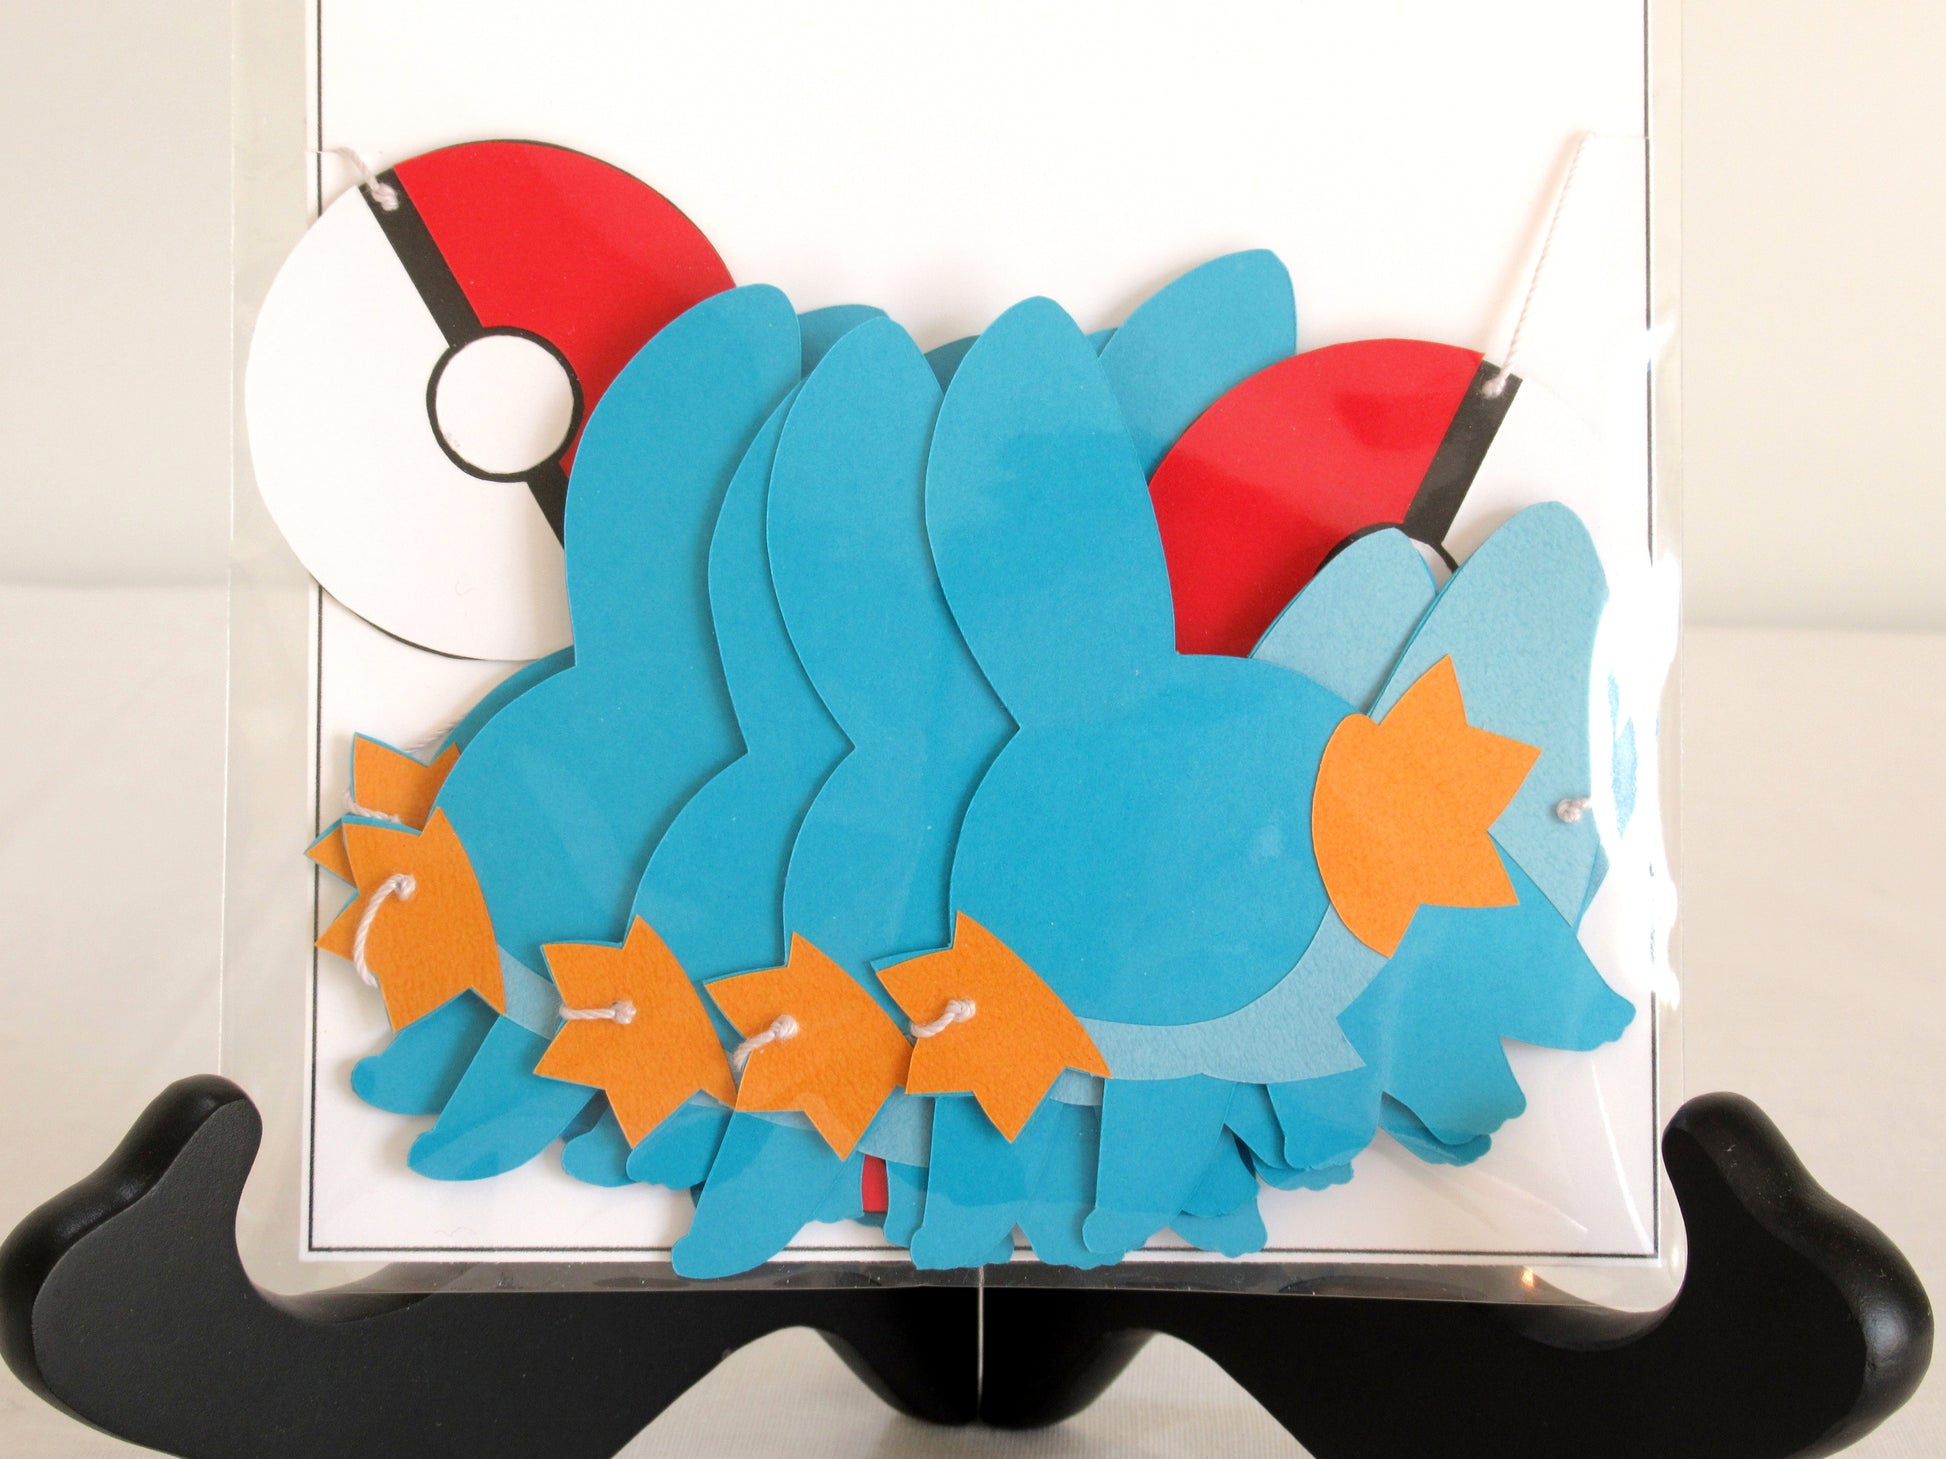 A close up of paper mudkips and pokeballs on a string inside a clear bag.